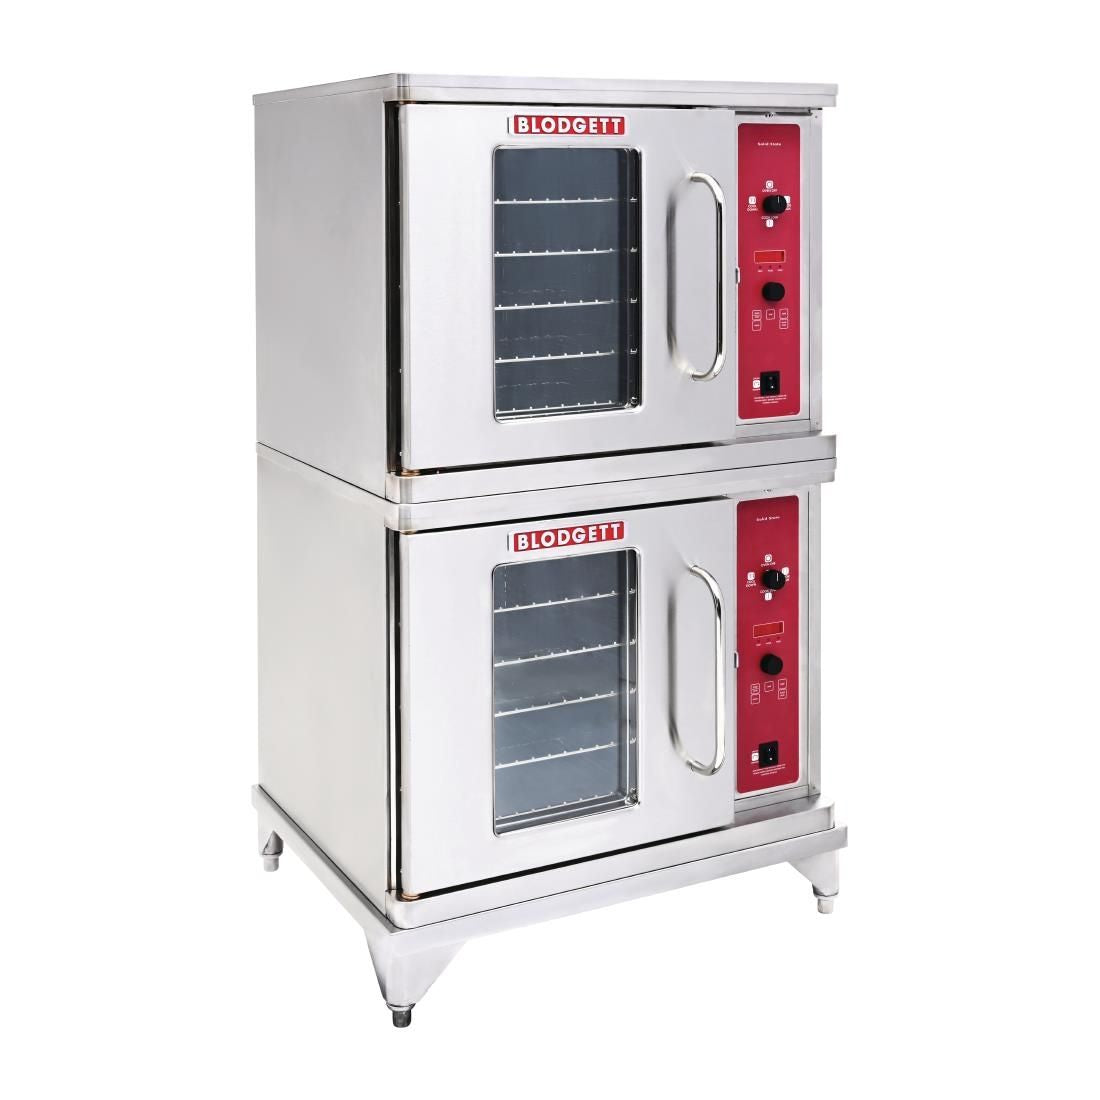 FP875 Blodgett Half Size Double Stacked Convection Oven CTB-2 JD Catering Equipment Solutions Ltd